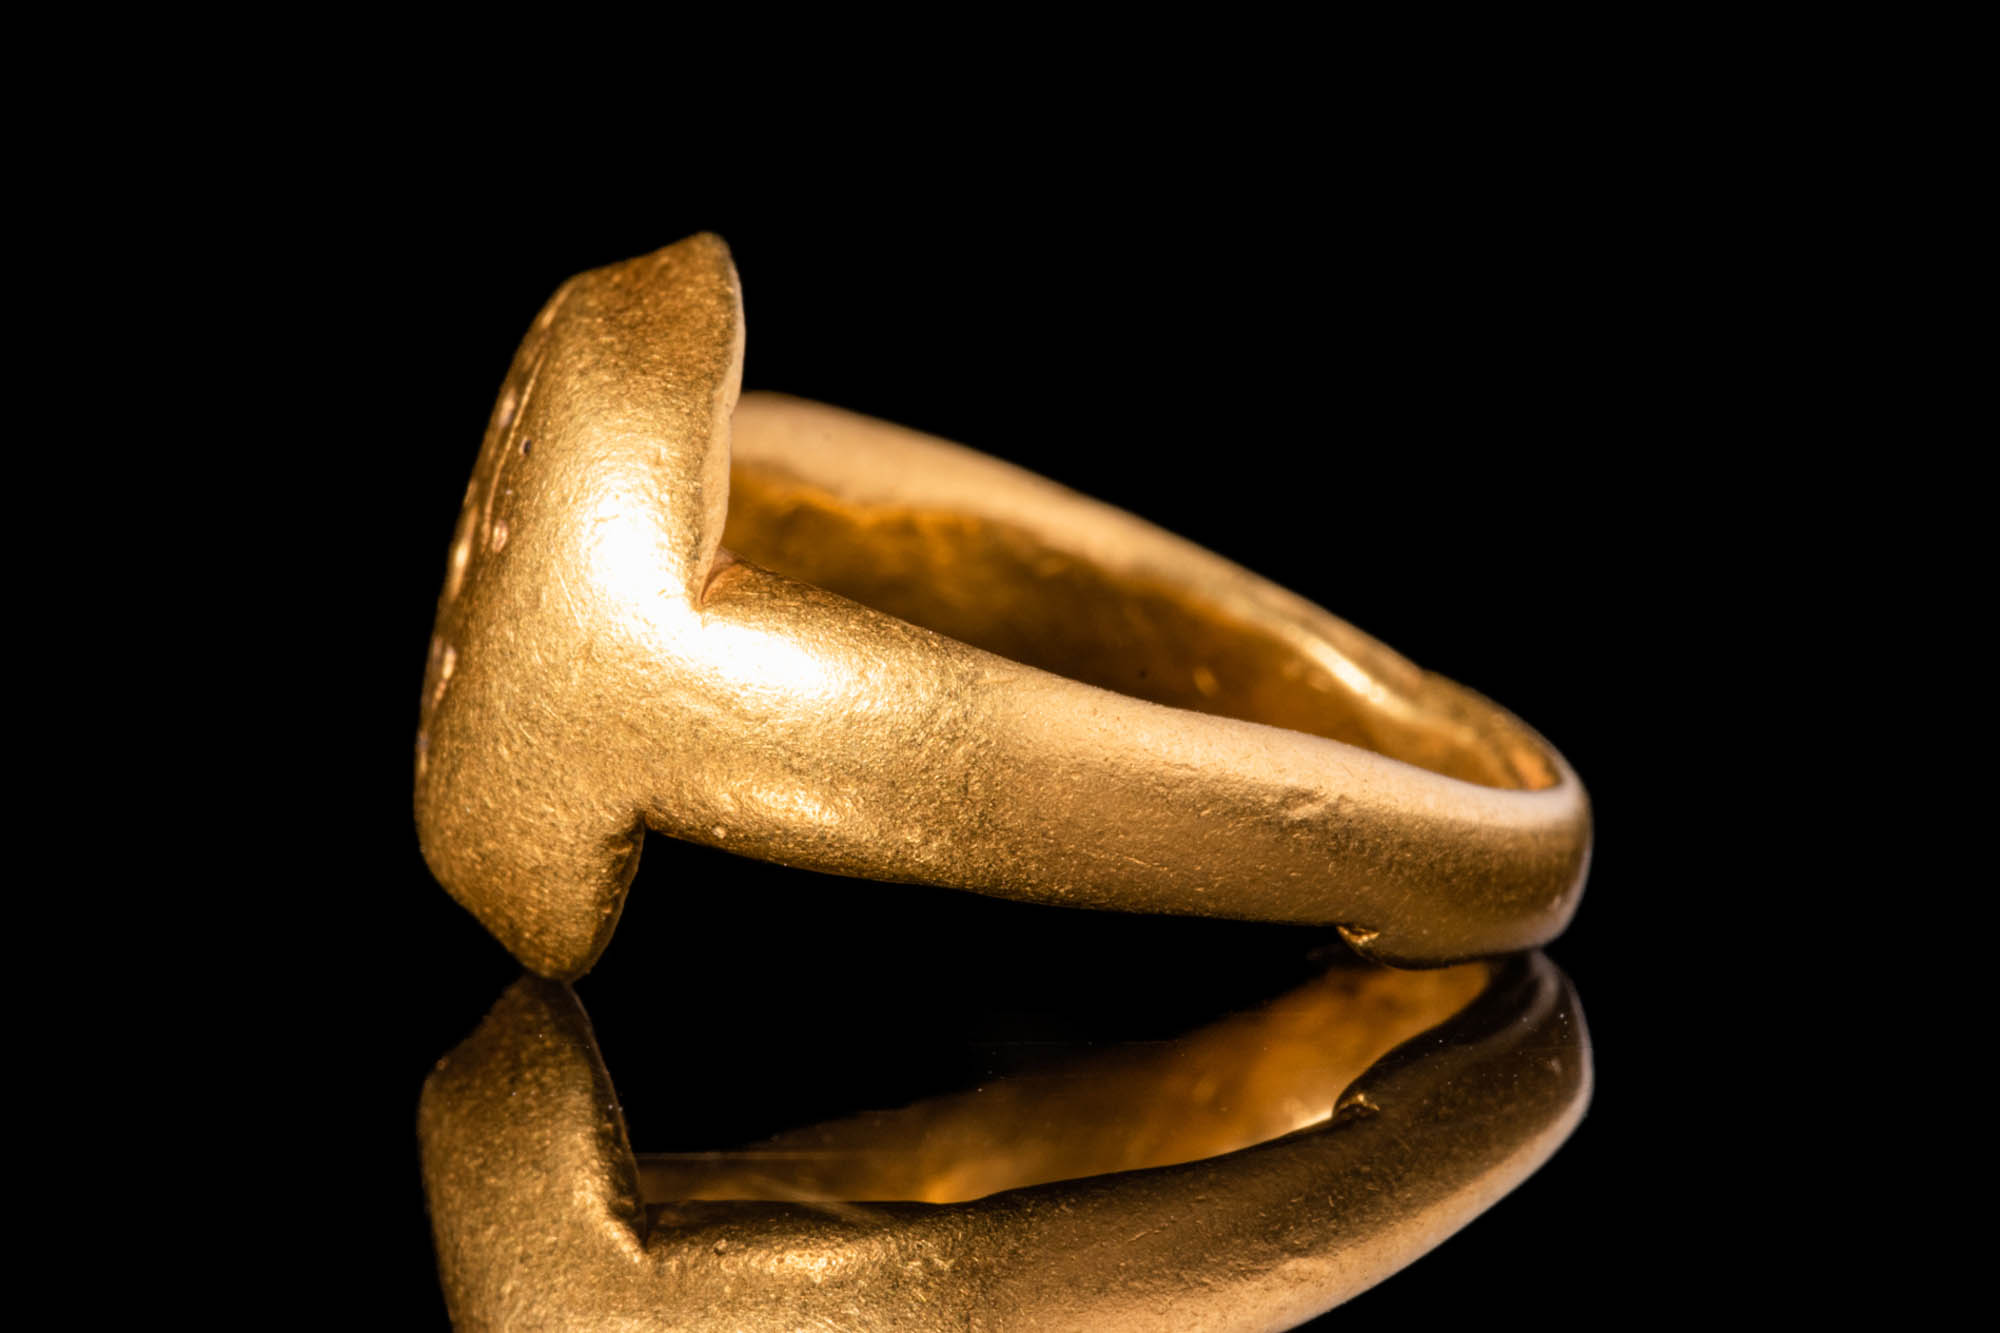 RARE JAVANESE GOLD RING WITH SRI MOTIF - Image 3 of 5